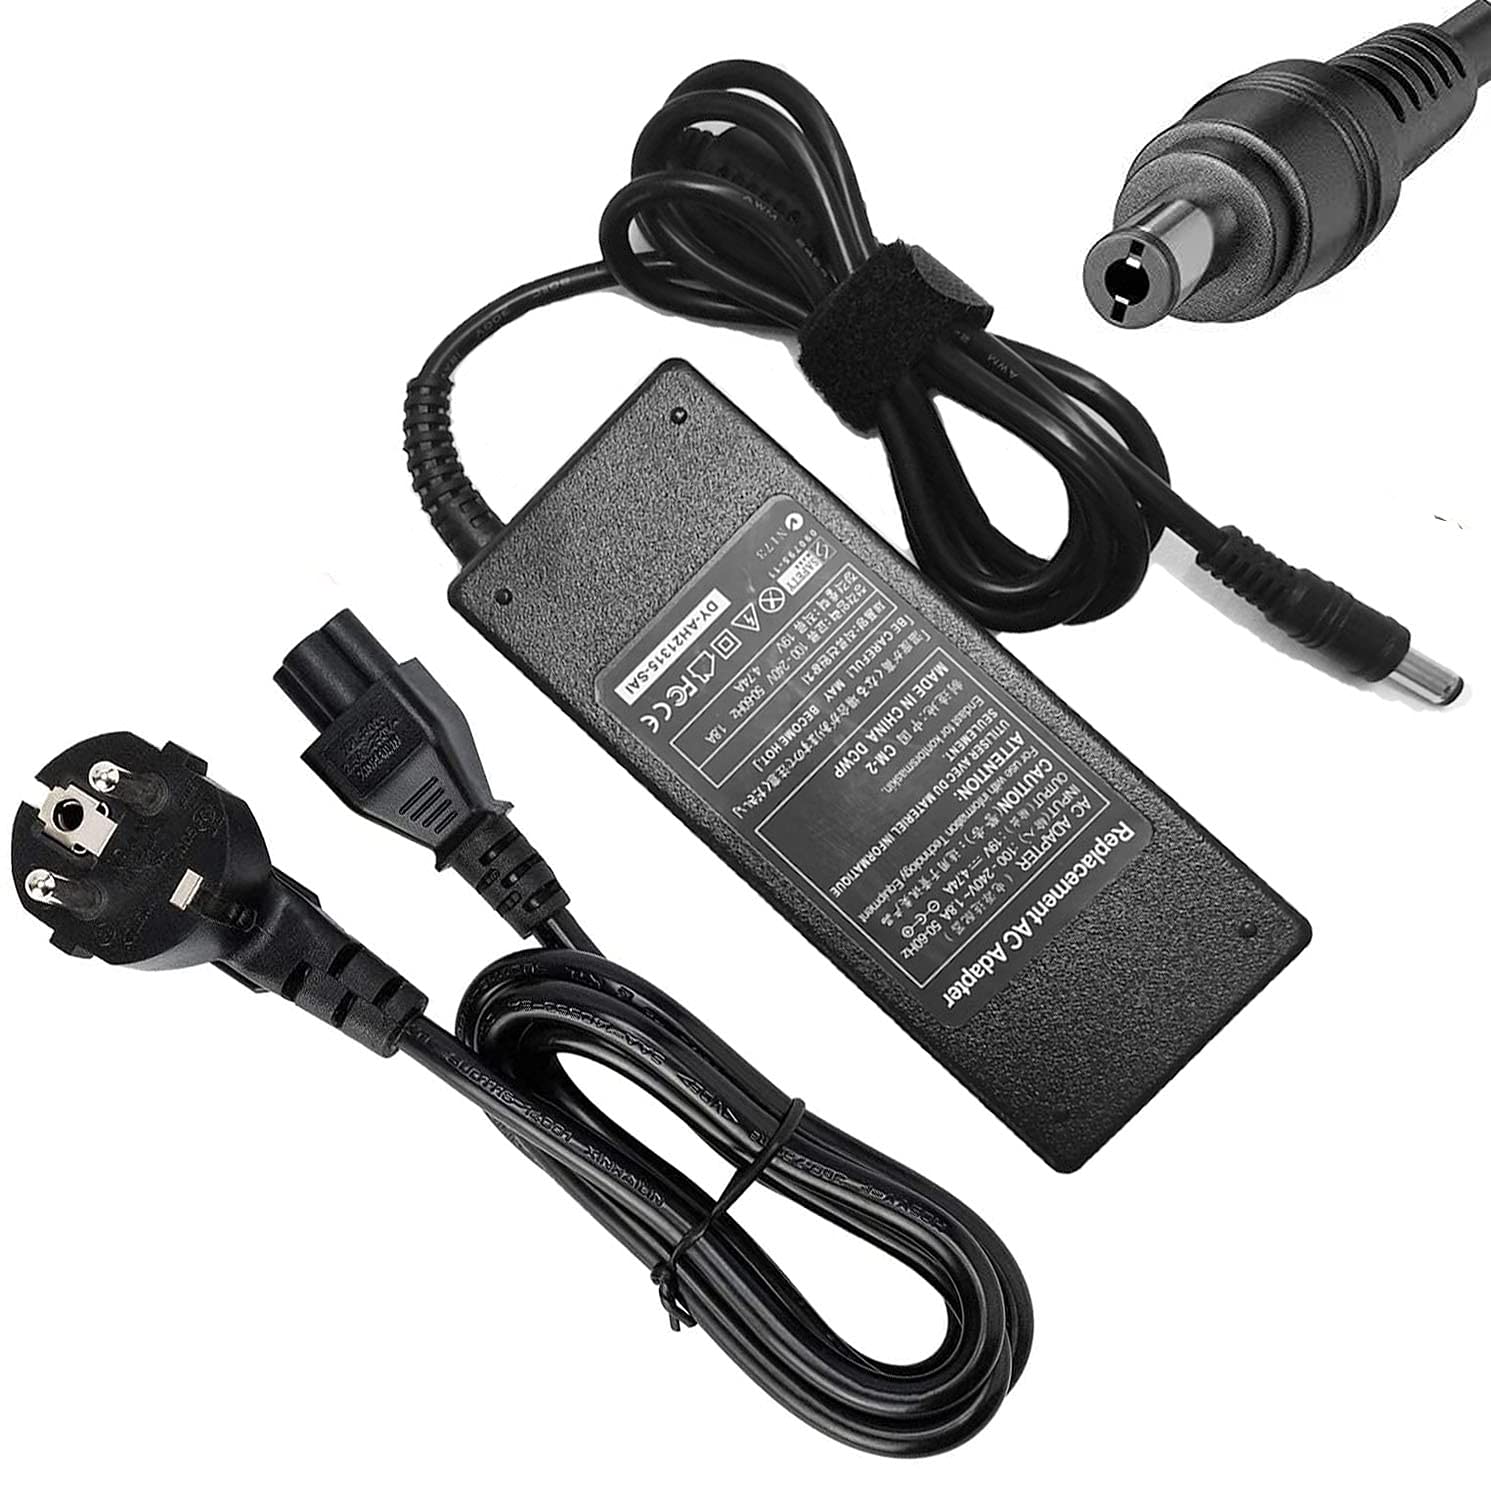 Laptop power supply and connections